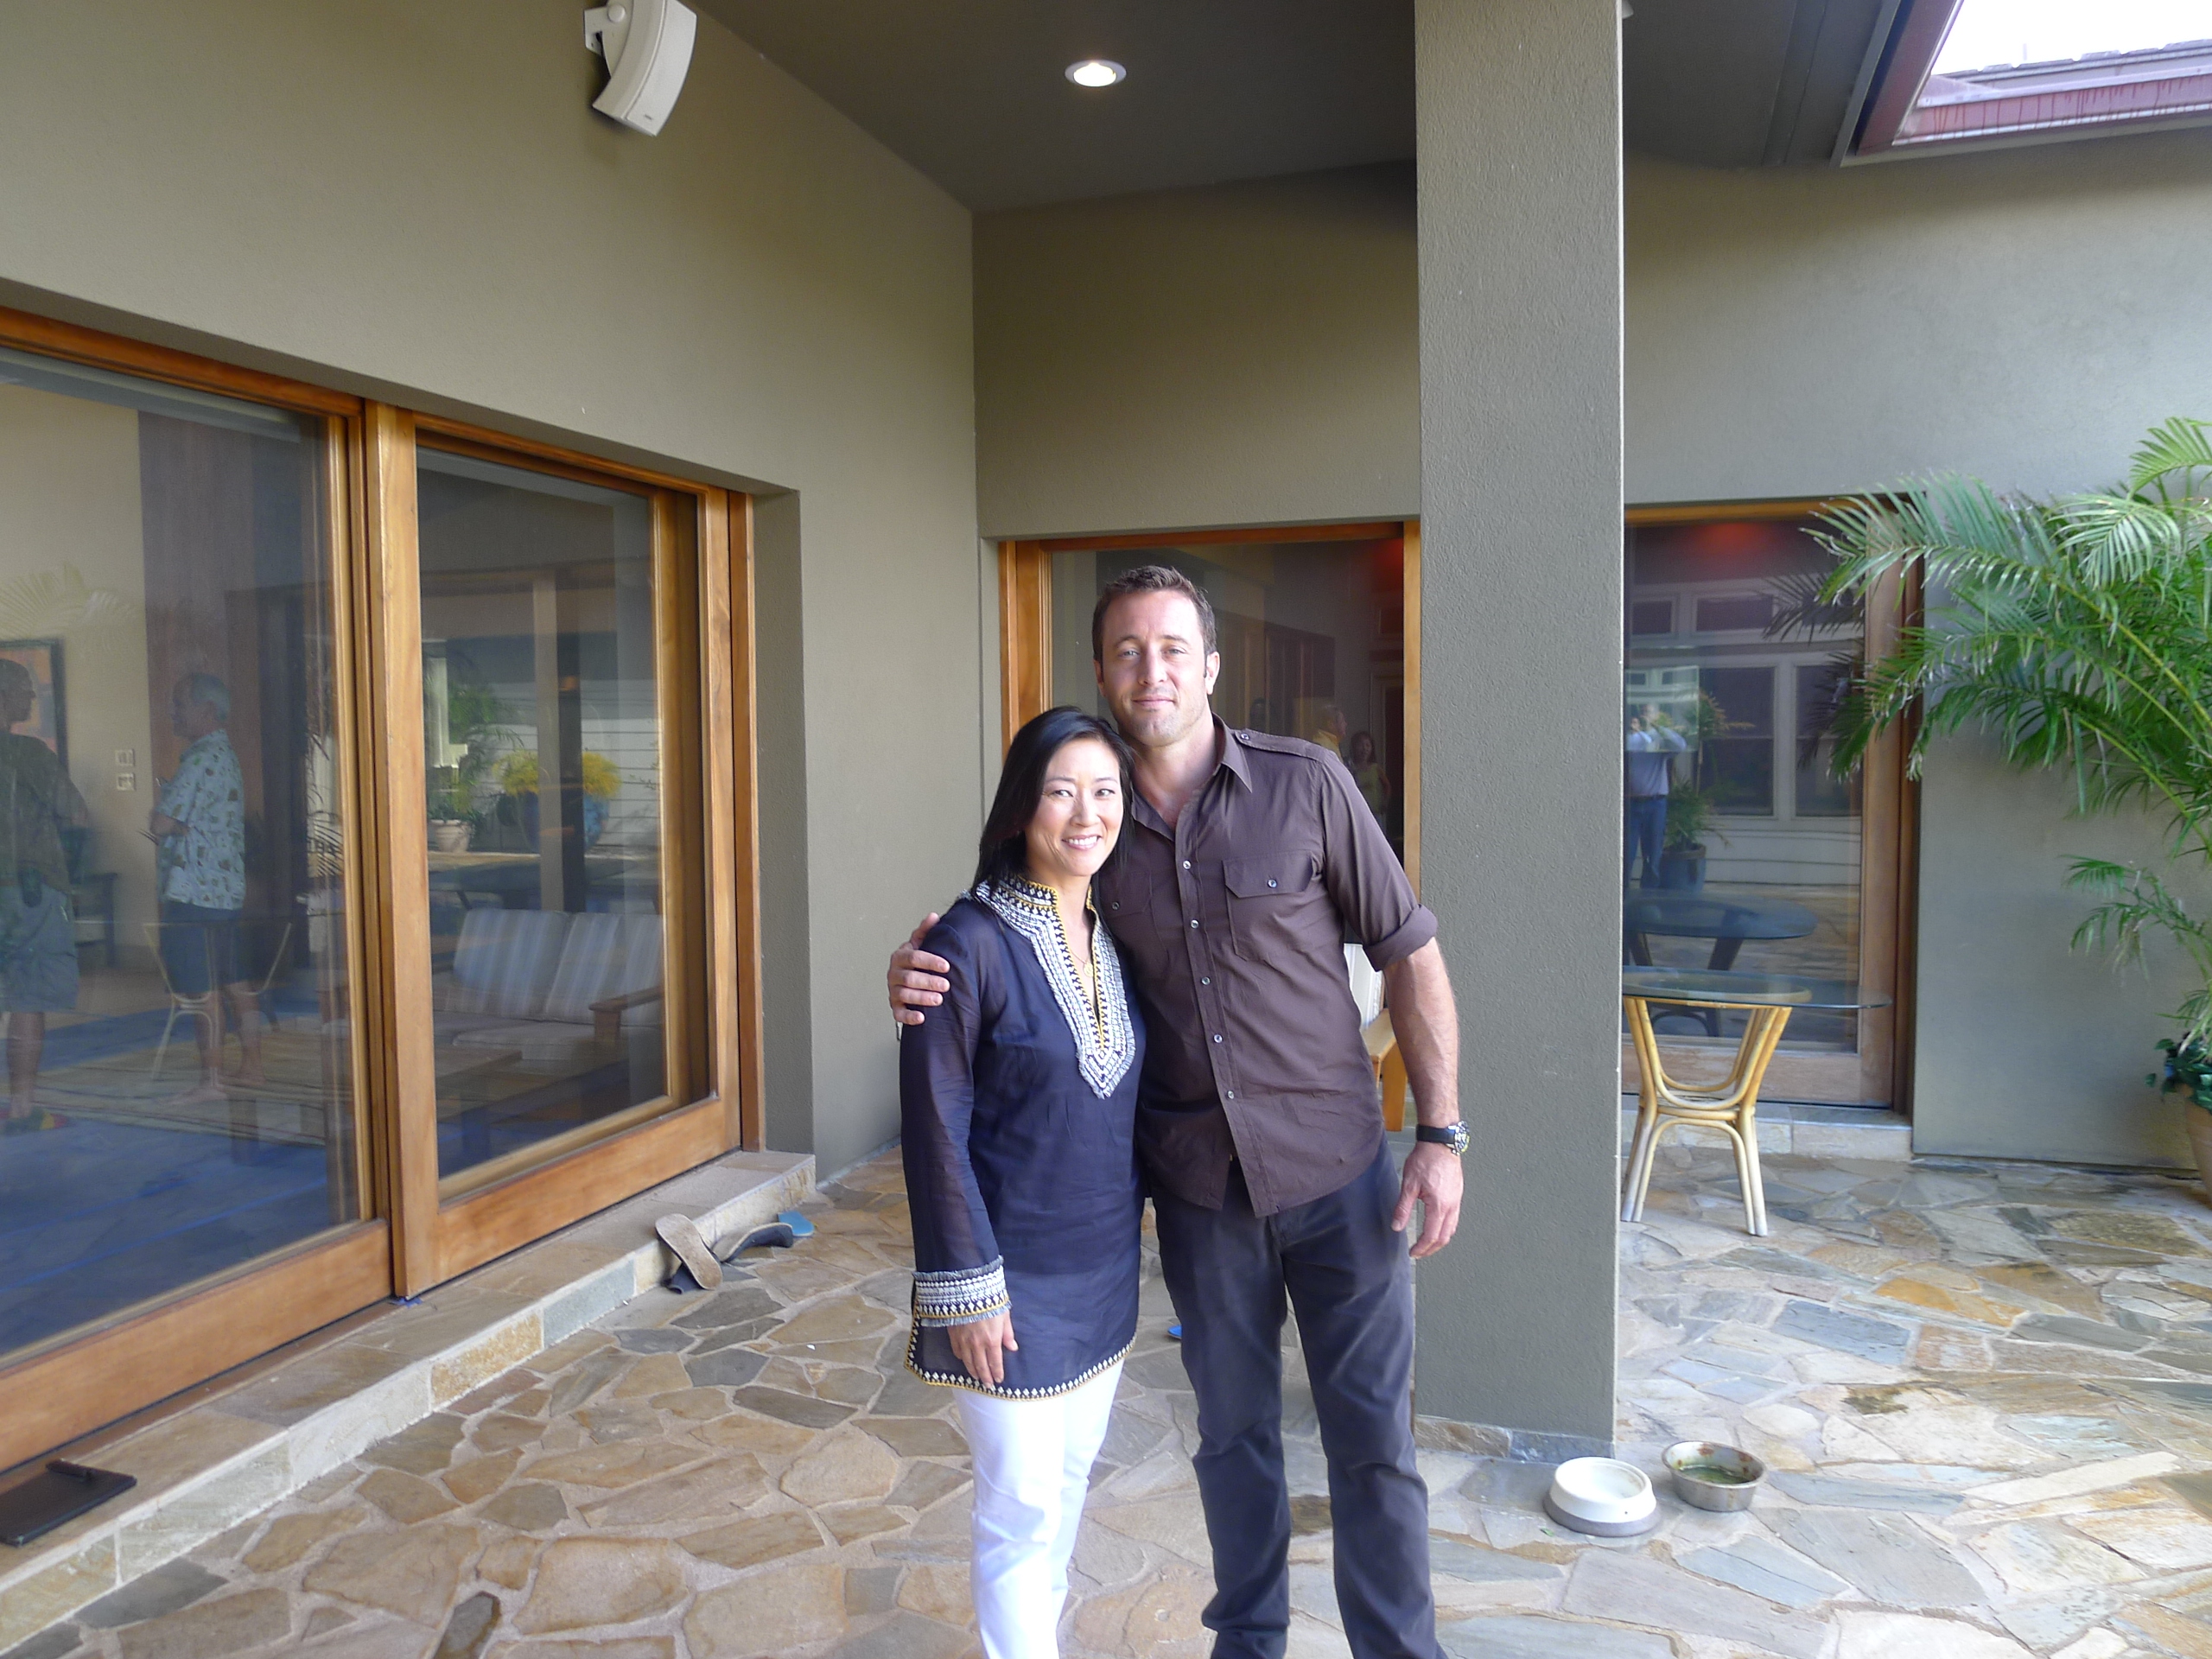 On-Location in Hawaii, with Alex O'Loughlin, star of Hawaii Five-0